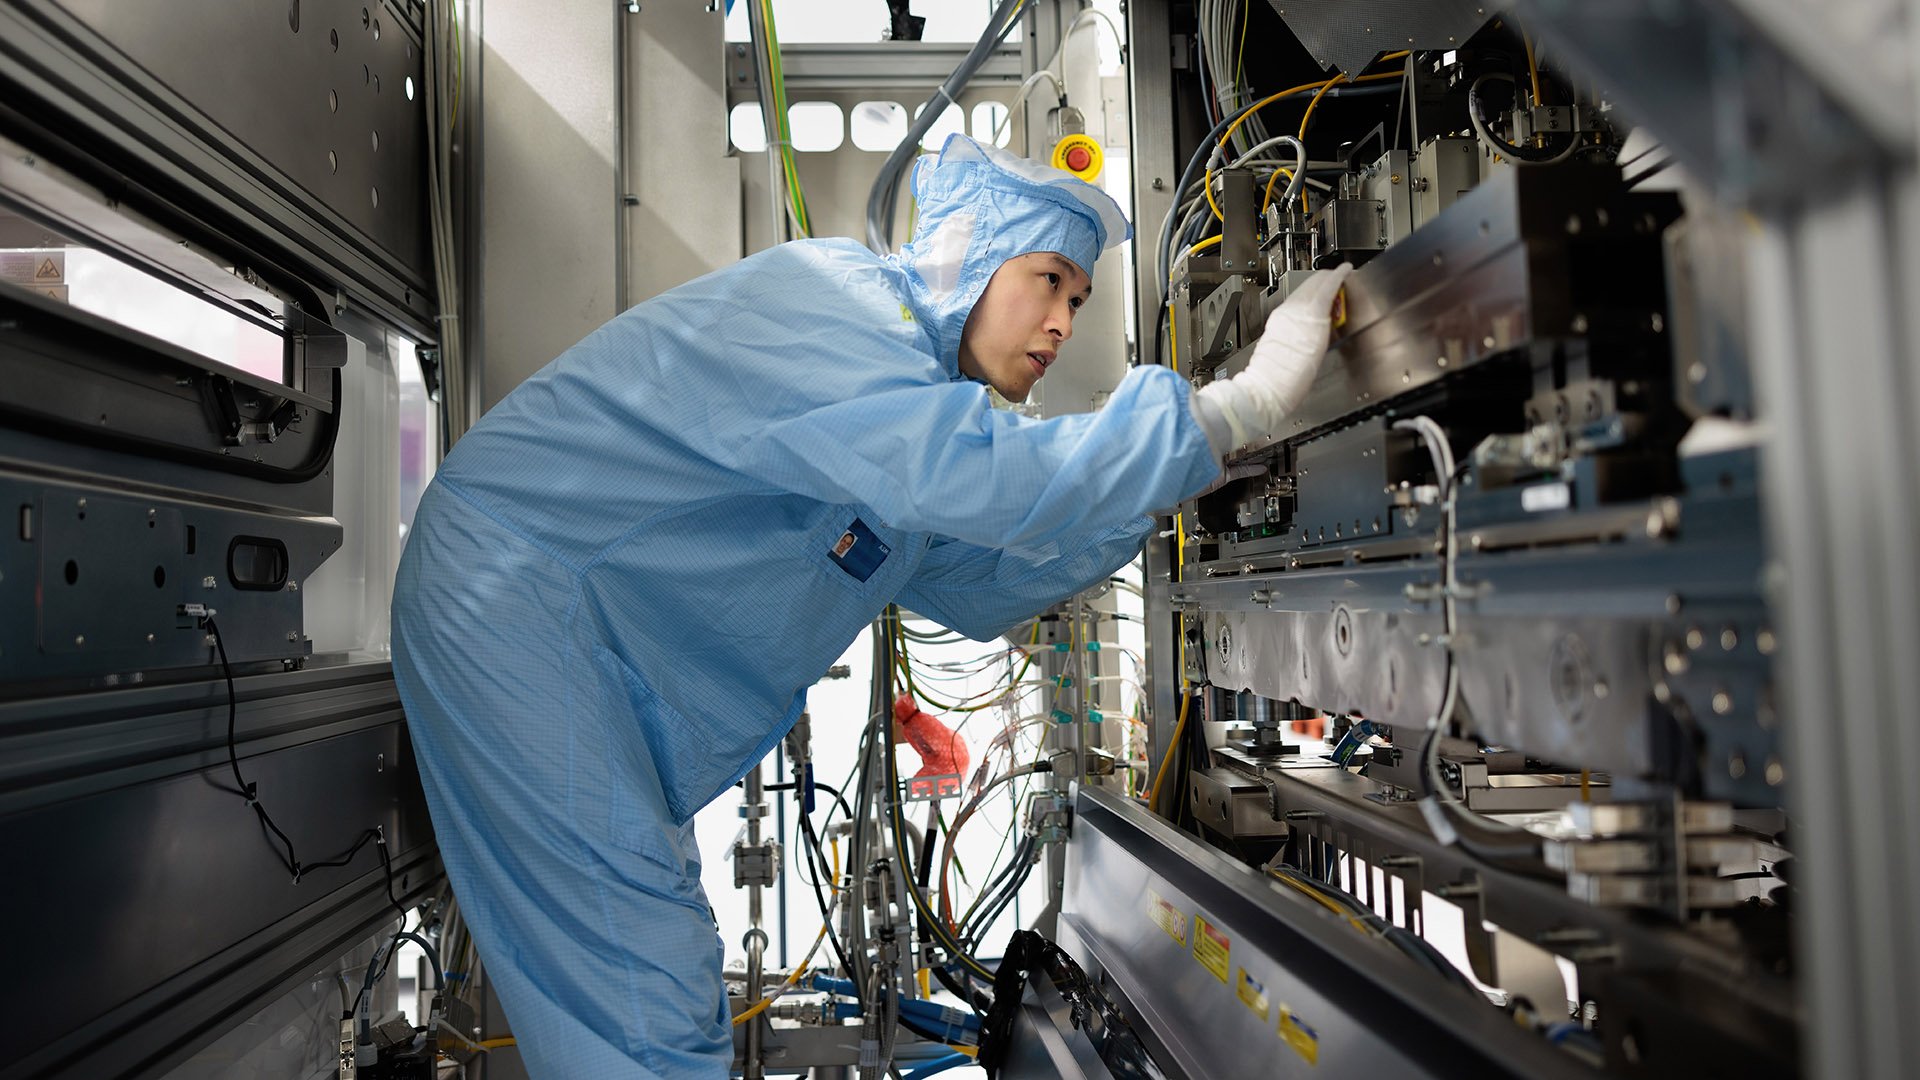 An ASML engineer in a cleanroom suit works on high-tech semiconductor manufacturing equipment.